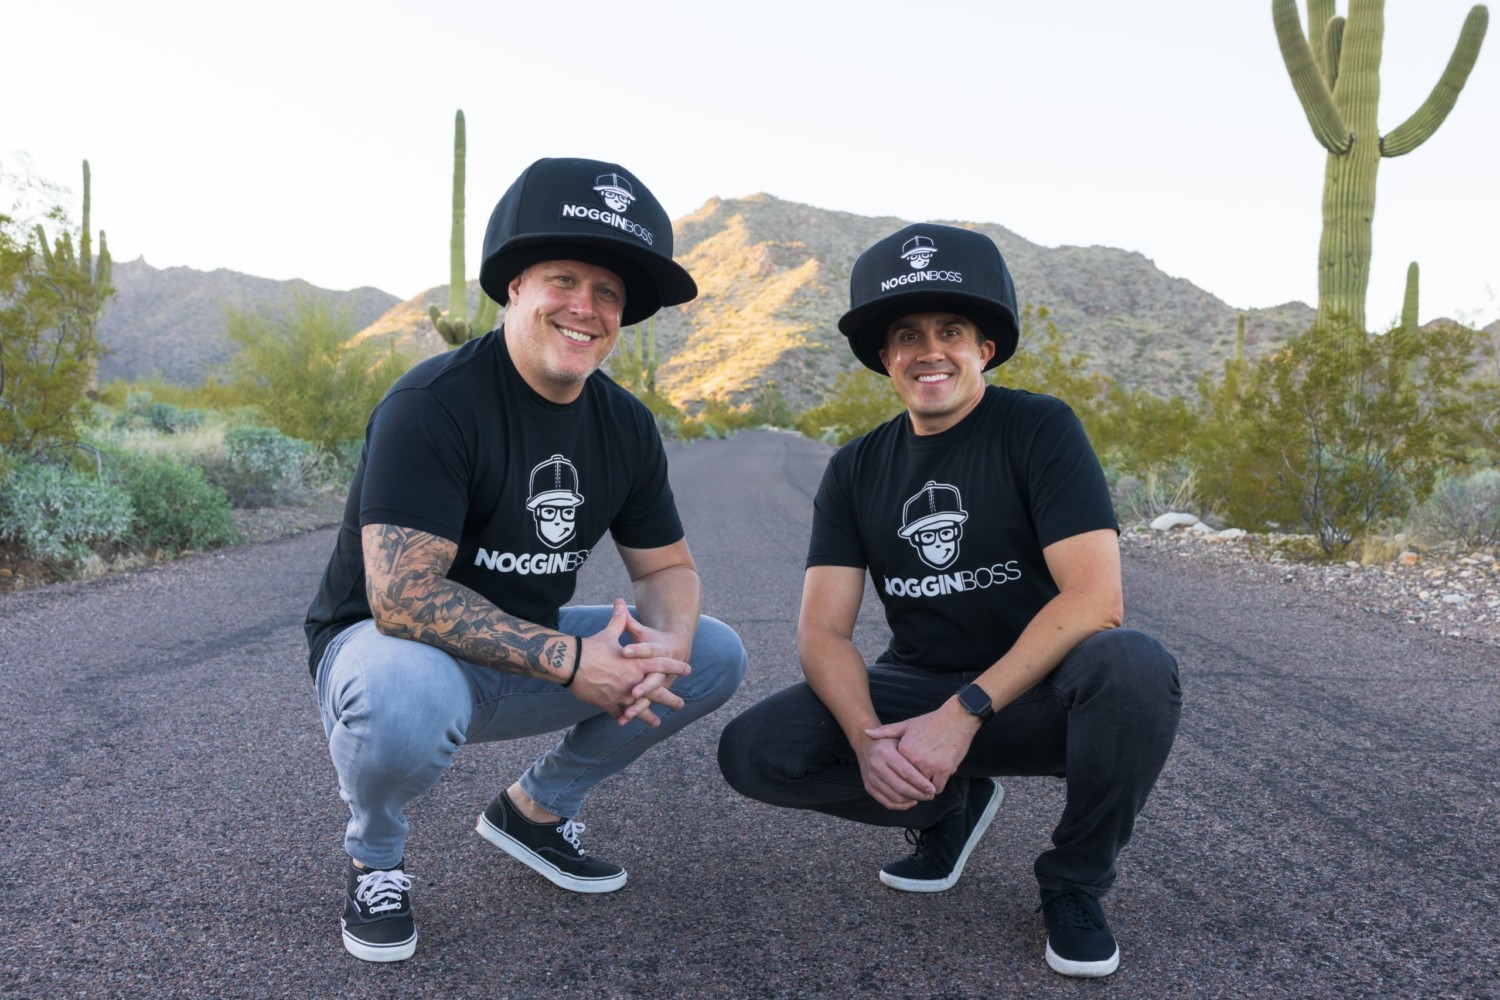 Founders of Noggin Boss Gabe Cooper and Sean Starner pose in large hats in front of desert back drop